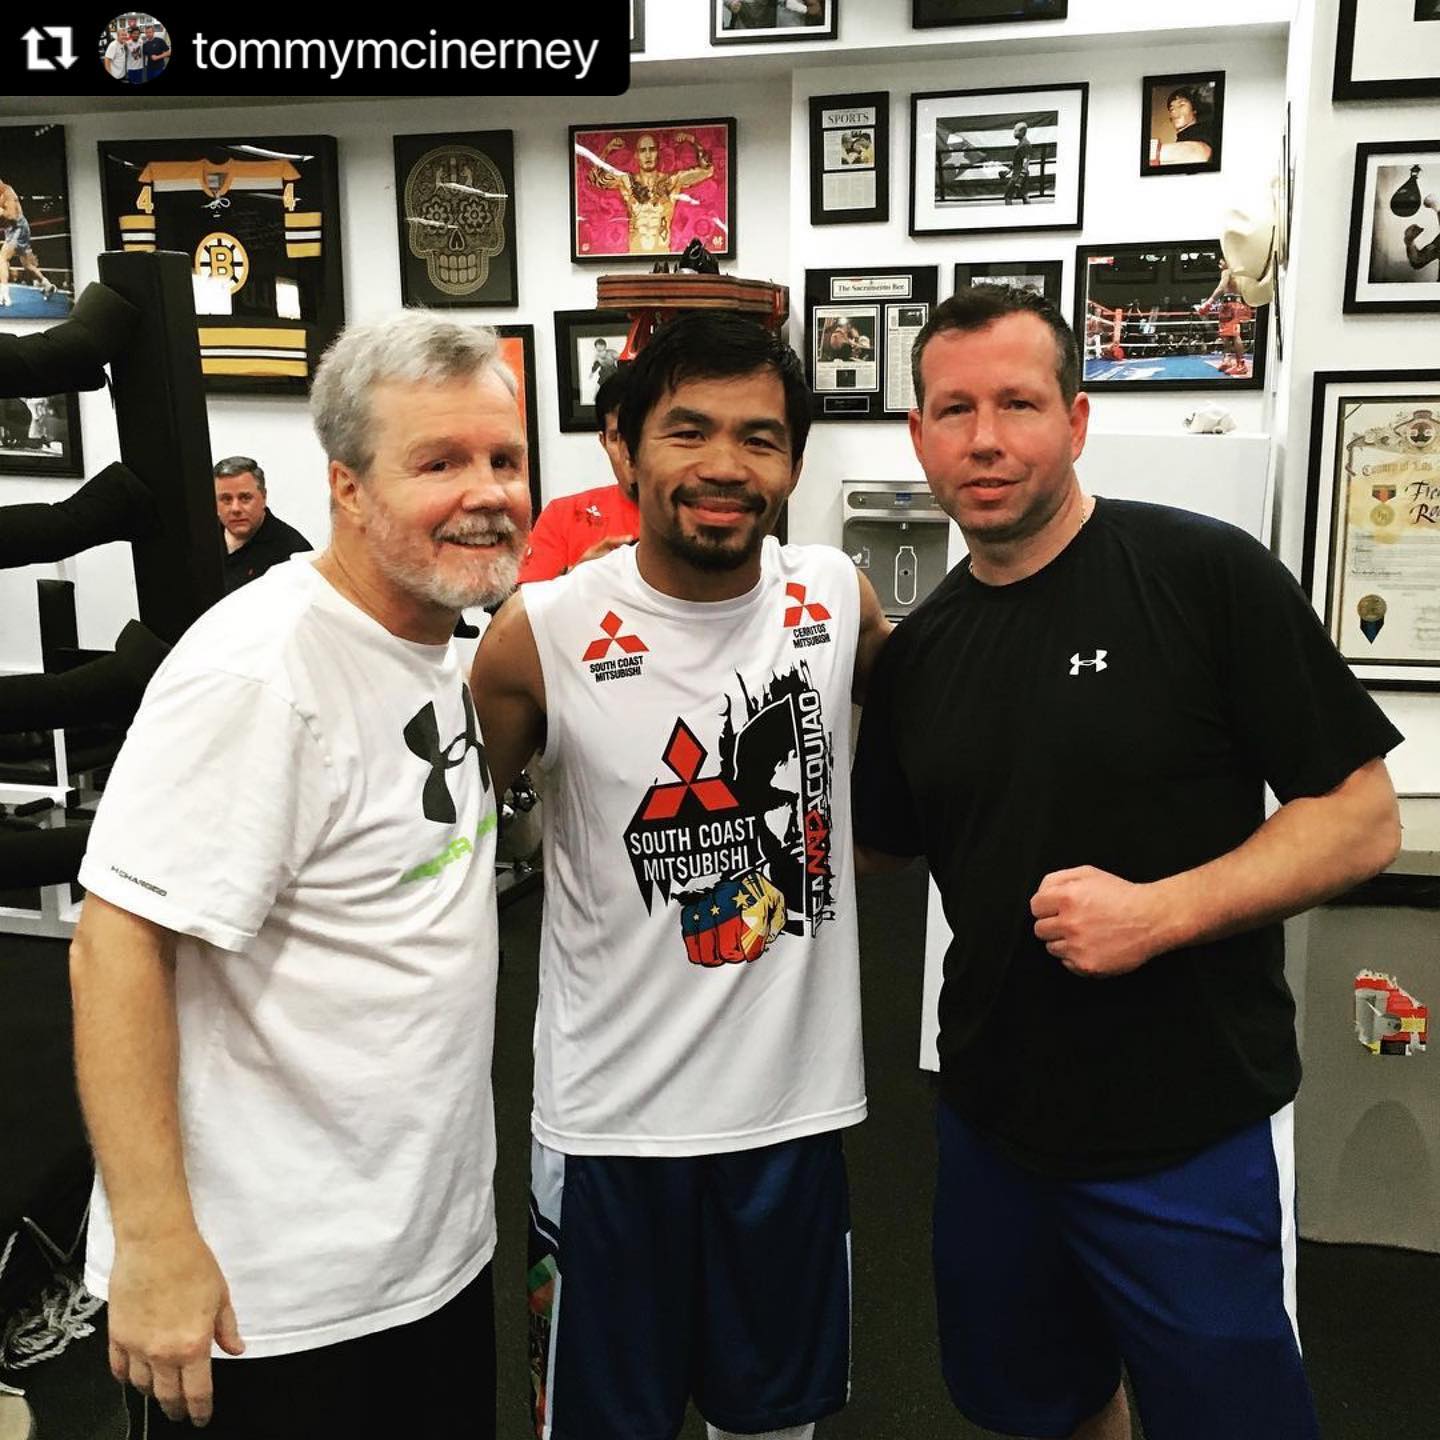 Repost @tommymcinerney •••
Great to get the opportunity to meet one of the best in the sport of boxing @mannypacquiao and be able to watch train @wildcardboxingclub with @freddieroach . Best of luck on your retirement , Thanks for all you have done for the sport . @fitboxboxingfitness